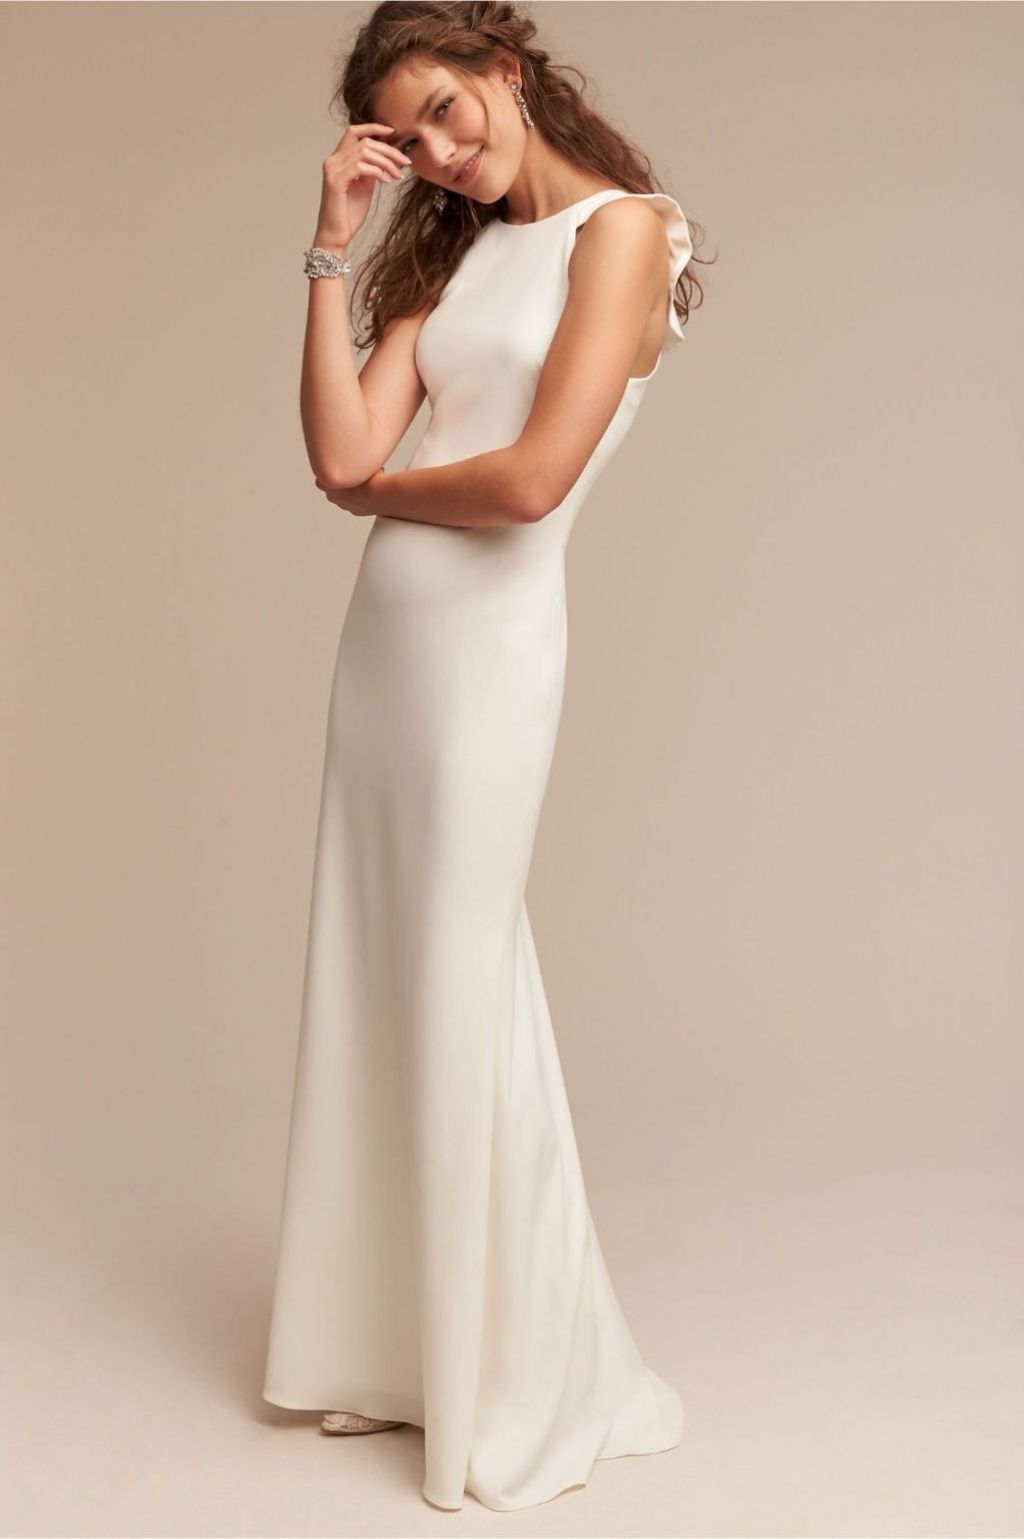 Slip wedding dress with clean lines and ruffled back